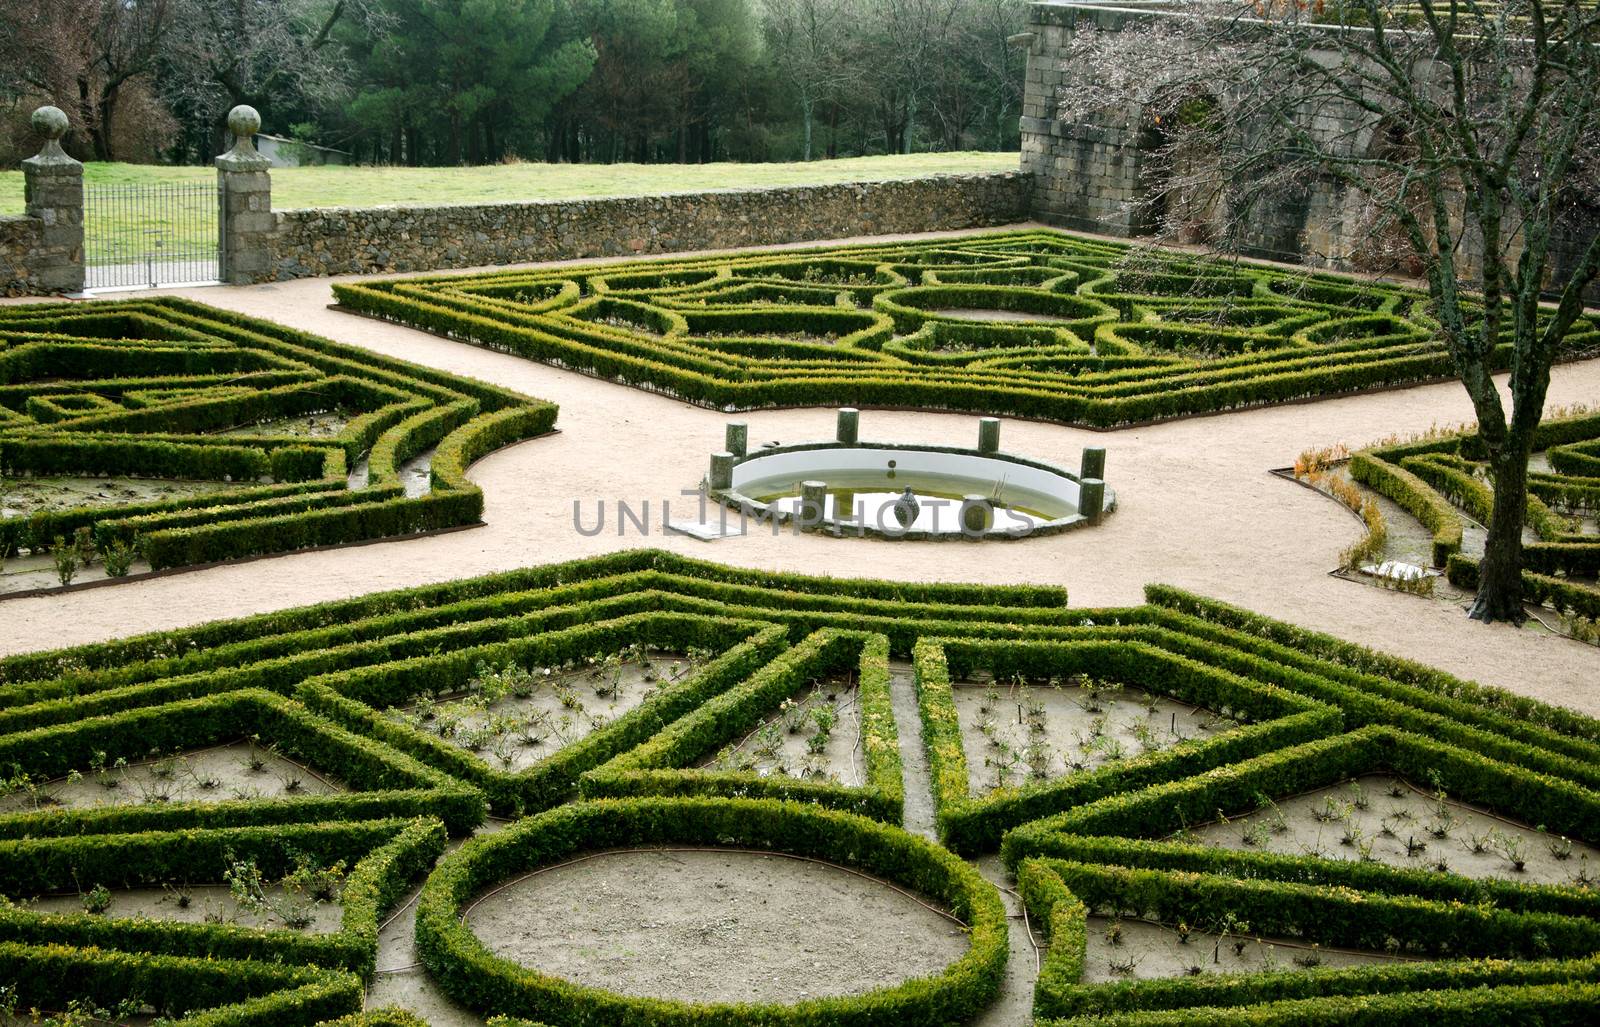 Trimmed maze hedges - El Escorial Madrid by lauria